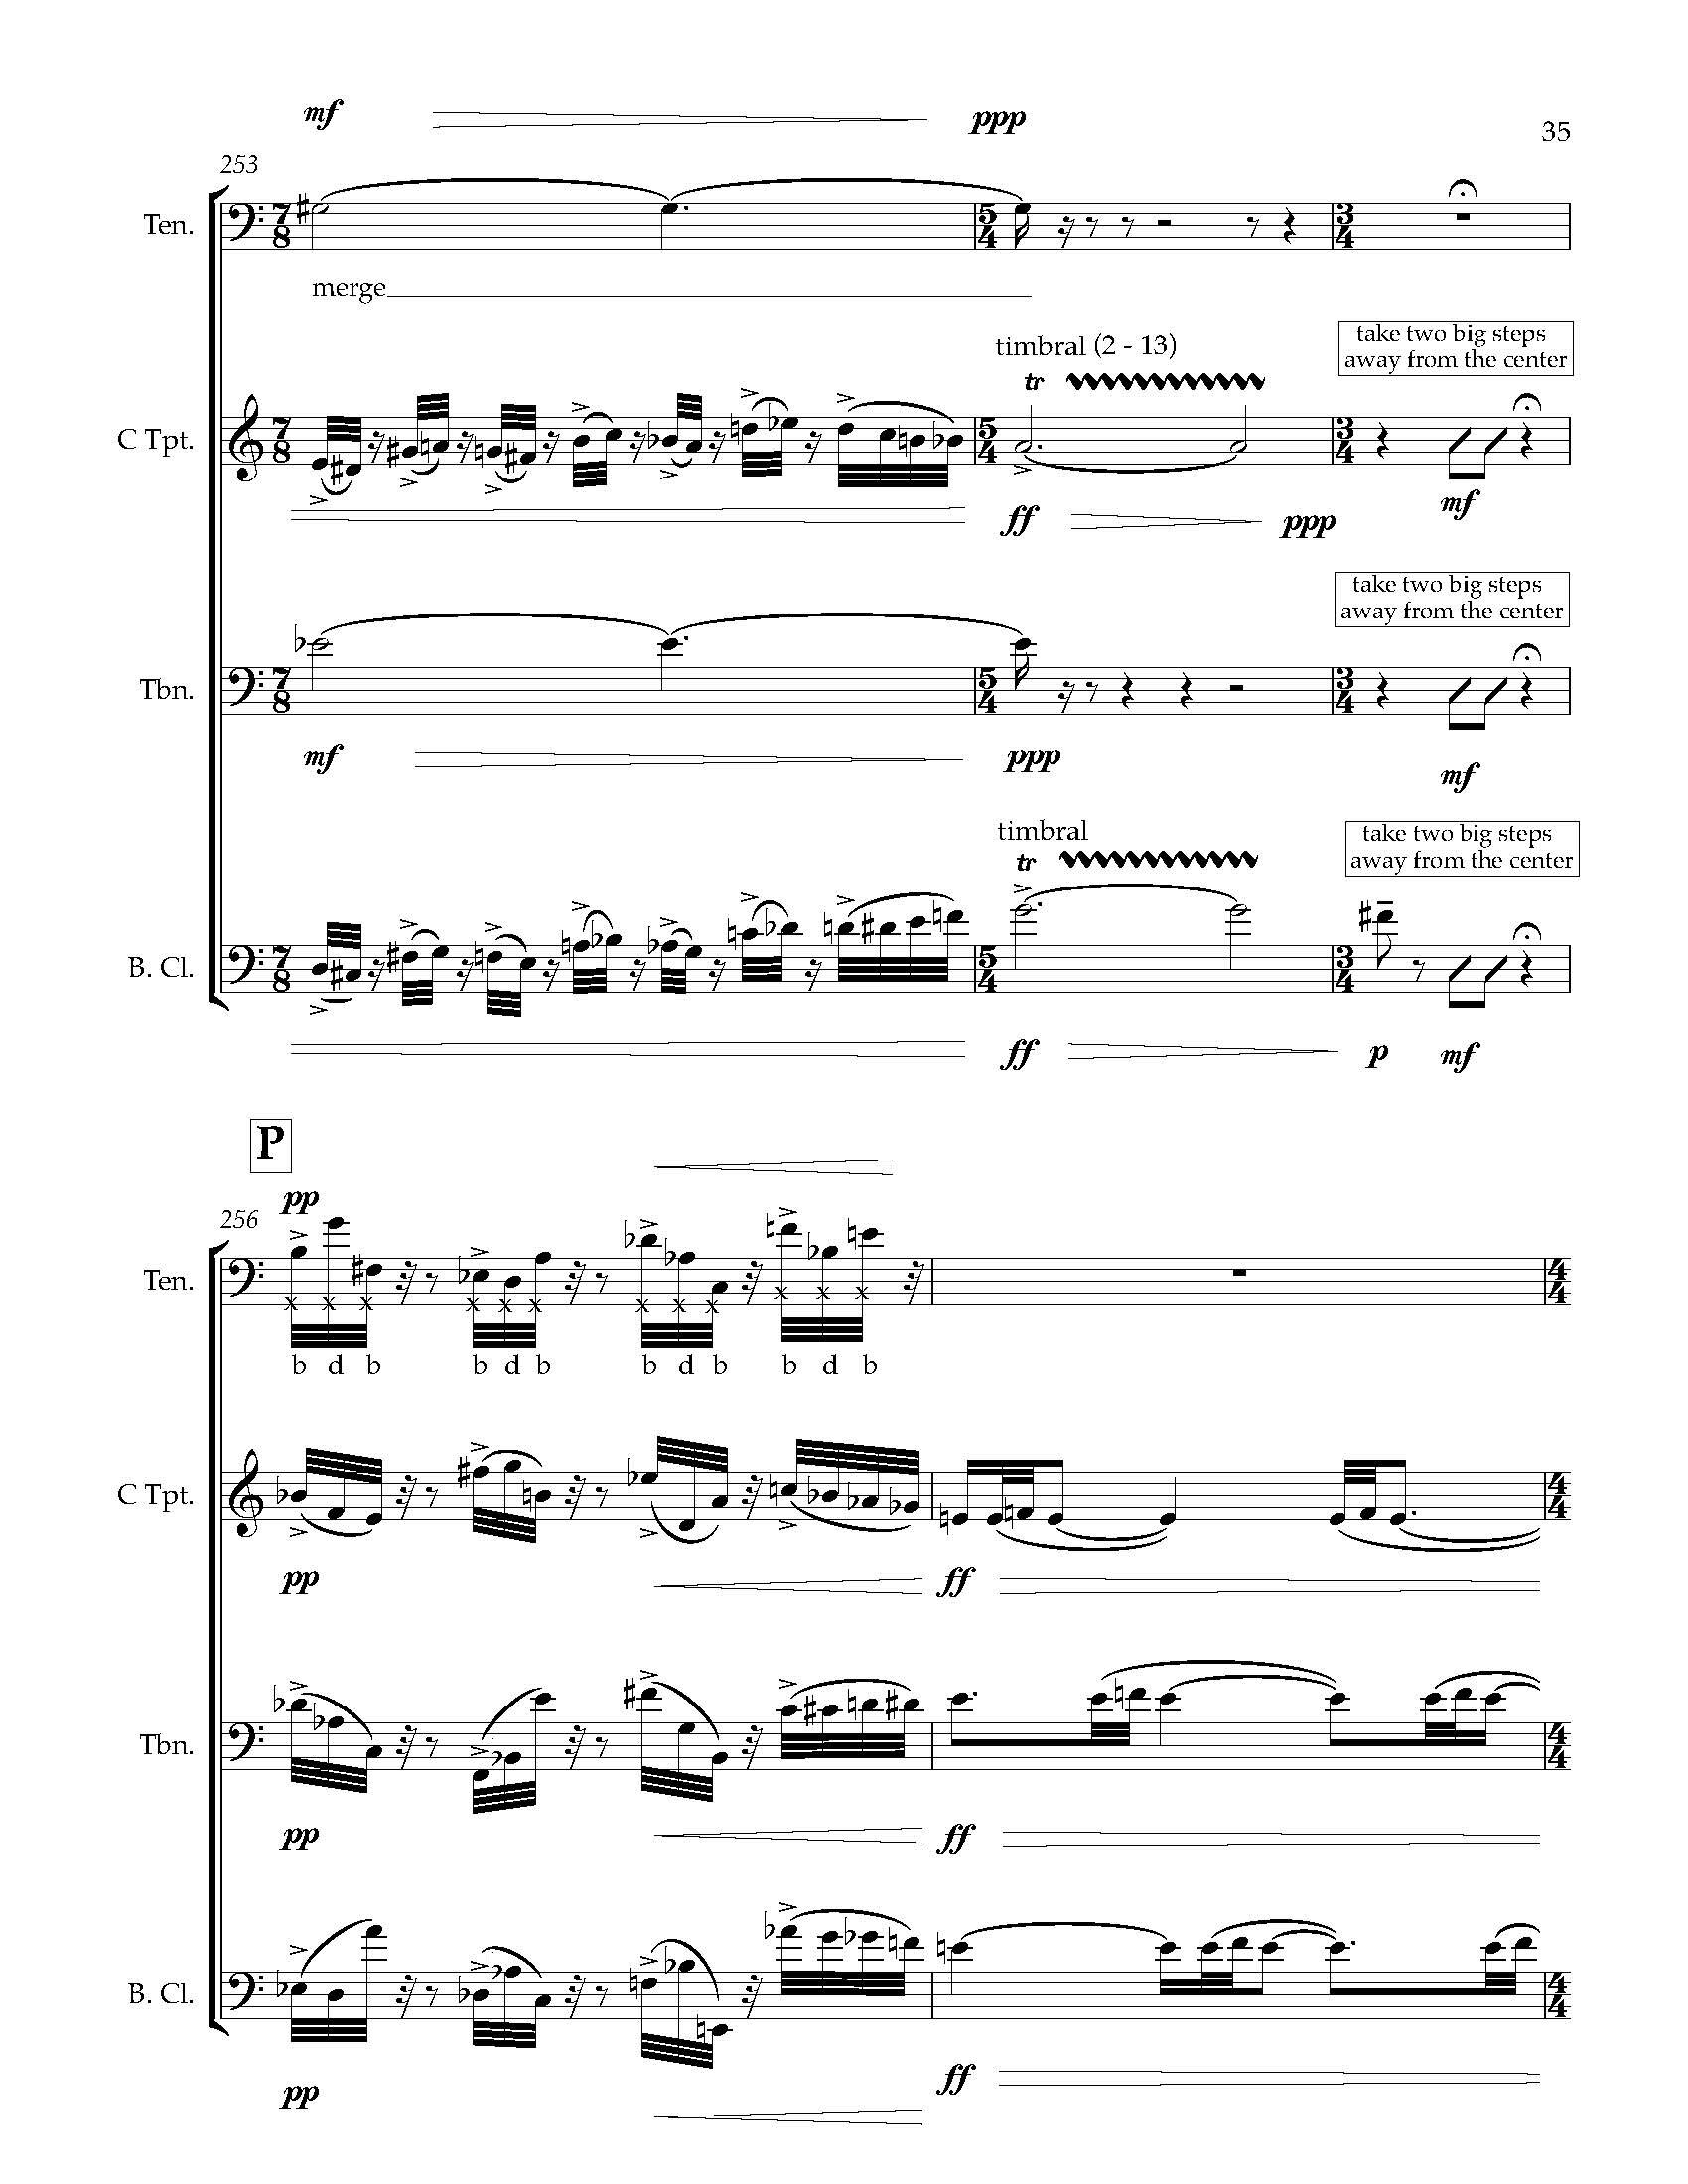 Many Worlds [1] - Complete Score_Page_44.jpg